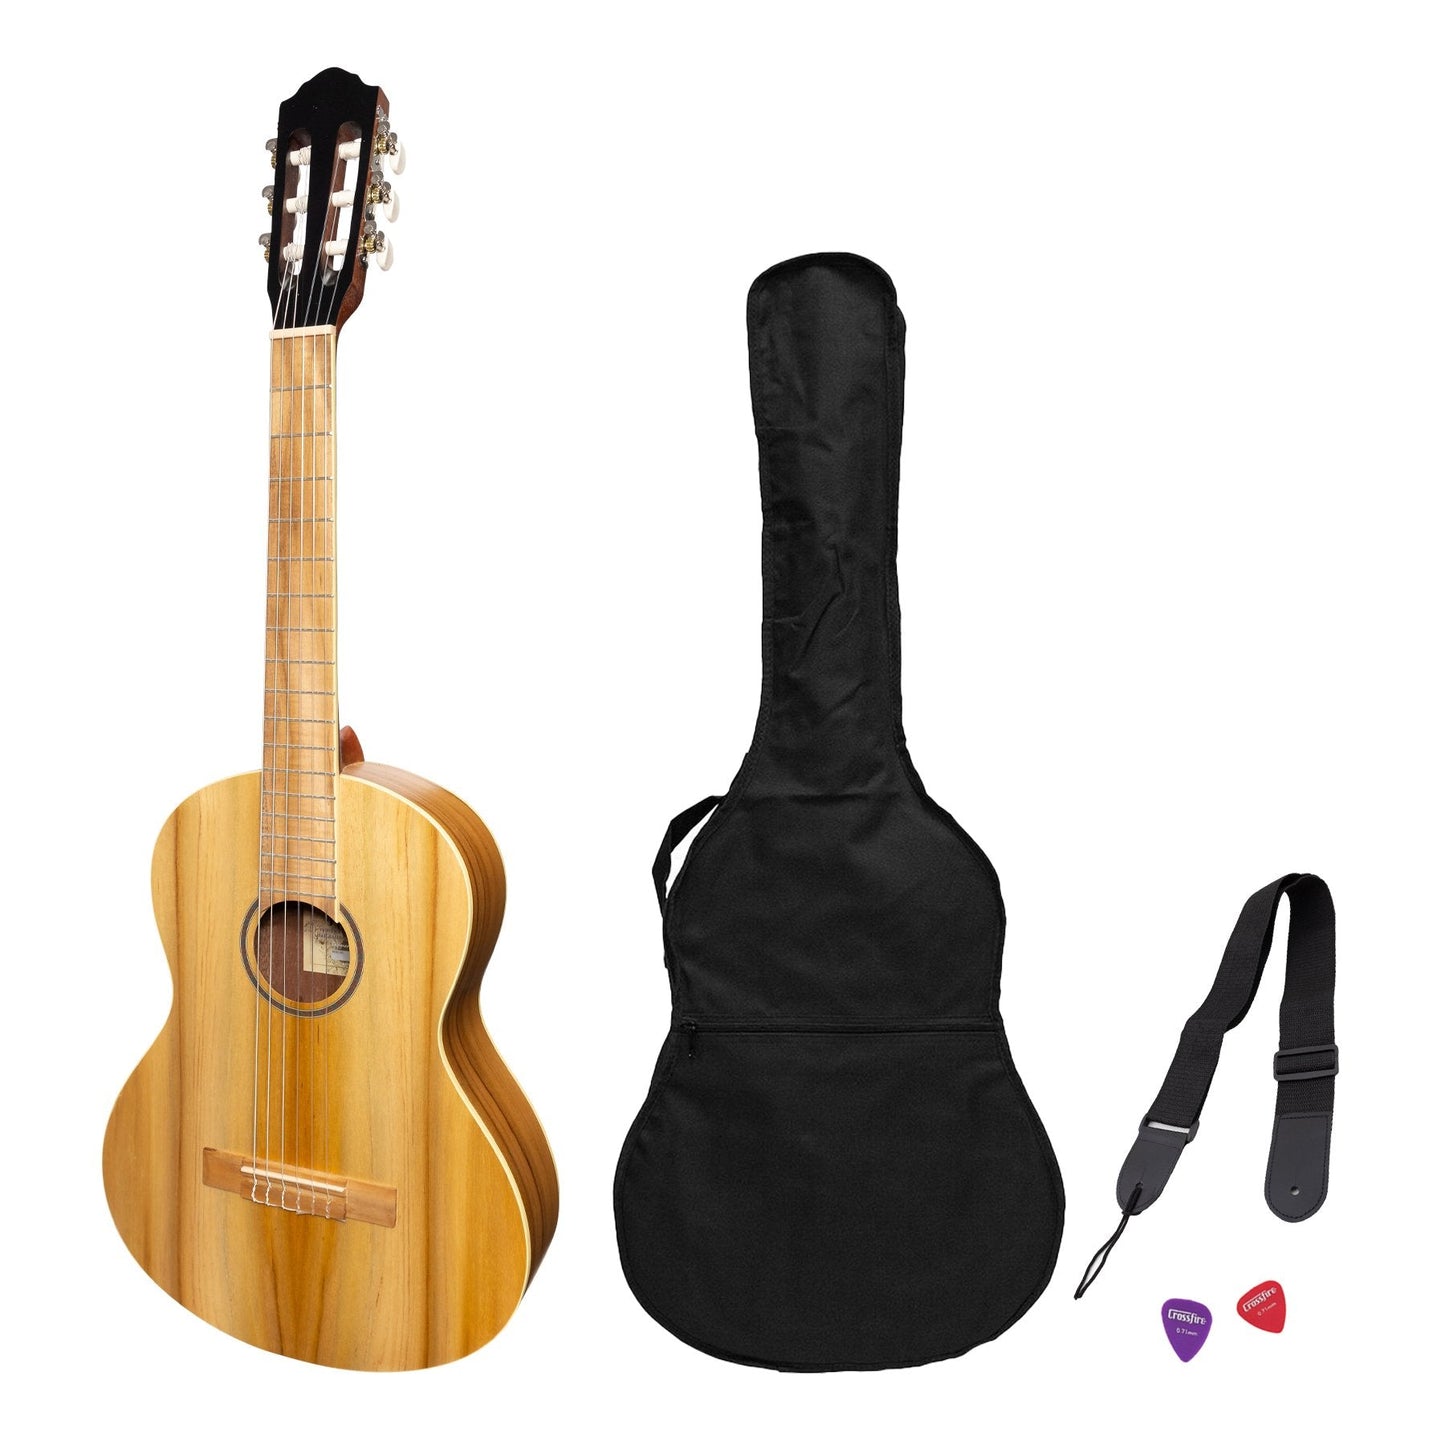 Martinez 3/4 Size Student Classical Guitar Pack with Built In Tuner (Jati-Teakwood)